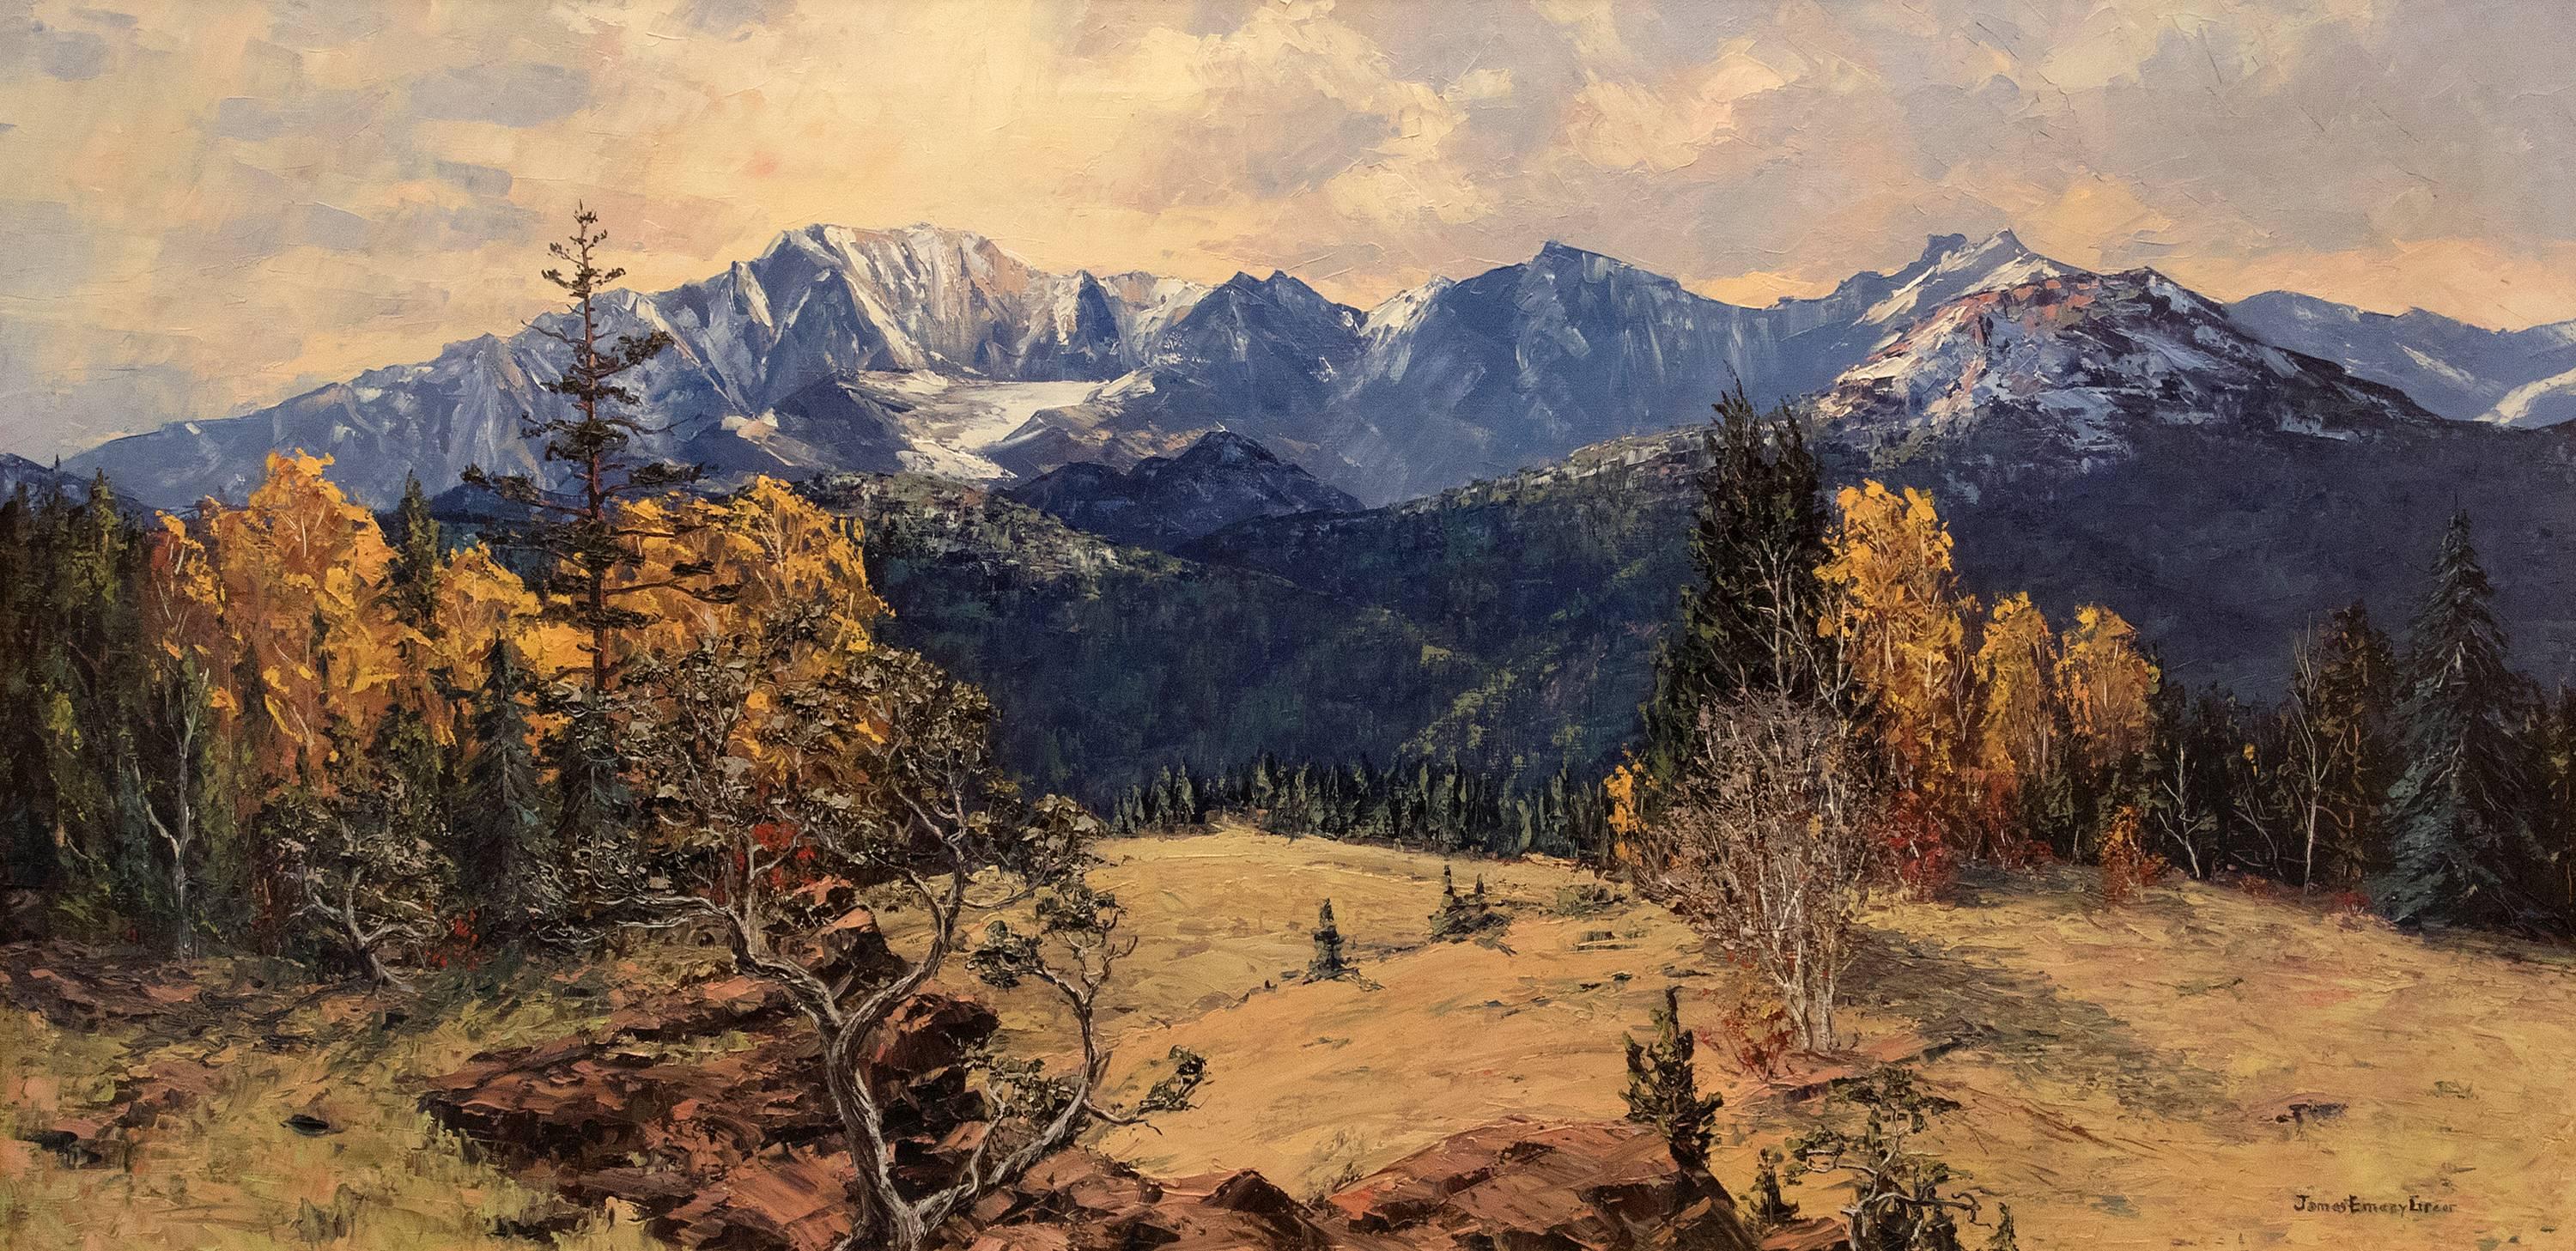 Untitled (Colorado Mountains) - Painting by James Emery Greer